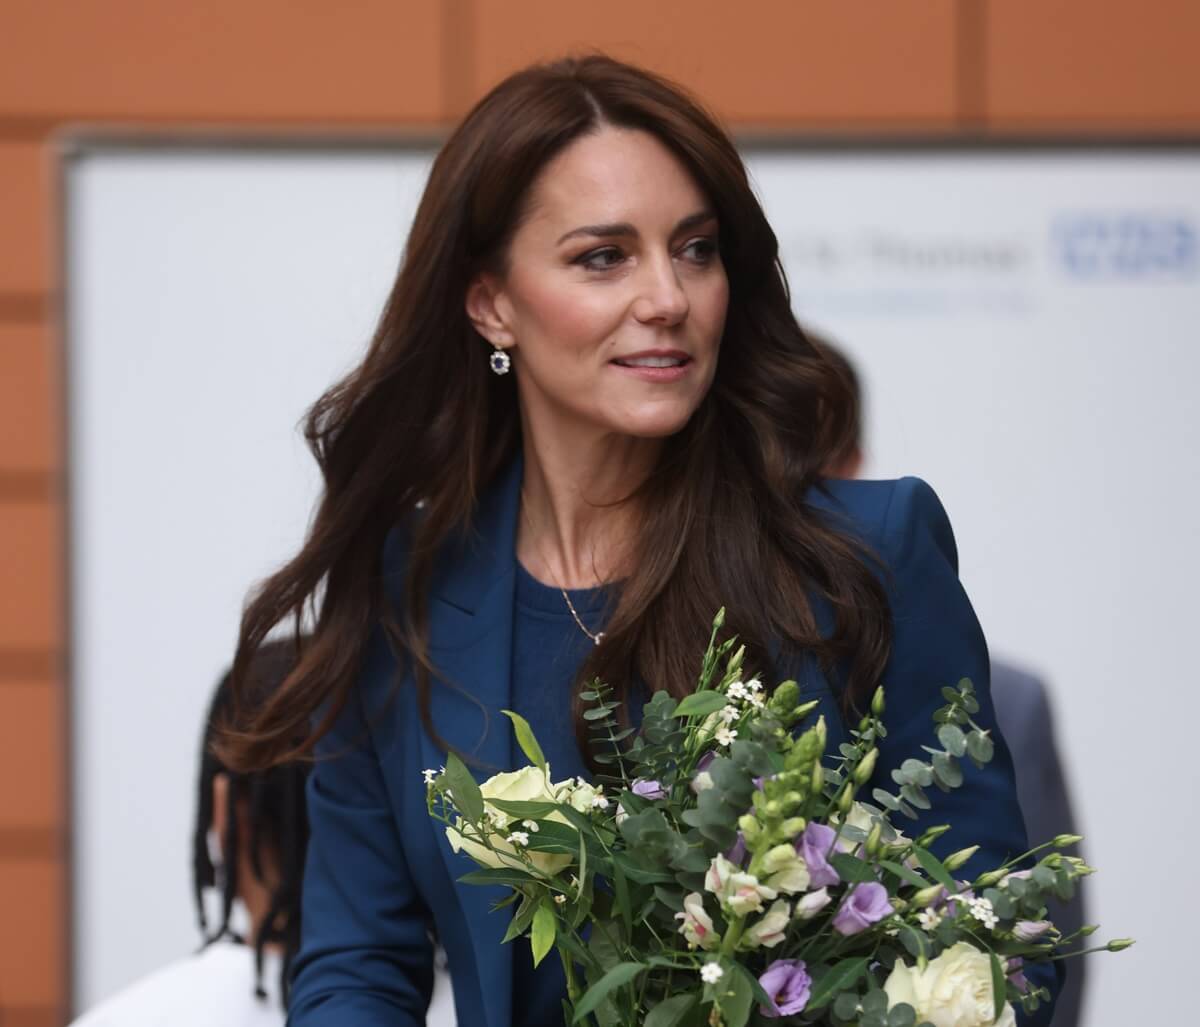 Kate Middleton is seen holding a bouquet of flowers during the opening of Evelina London's new children's day surgery unit